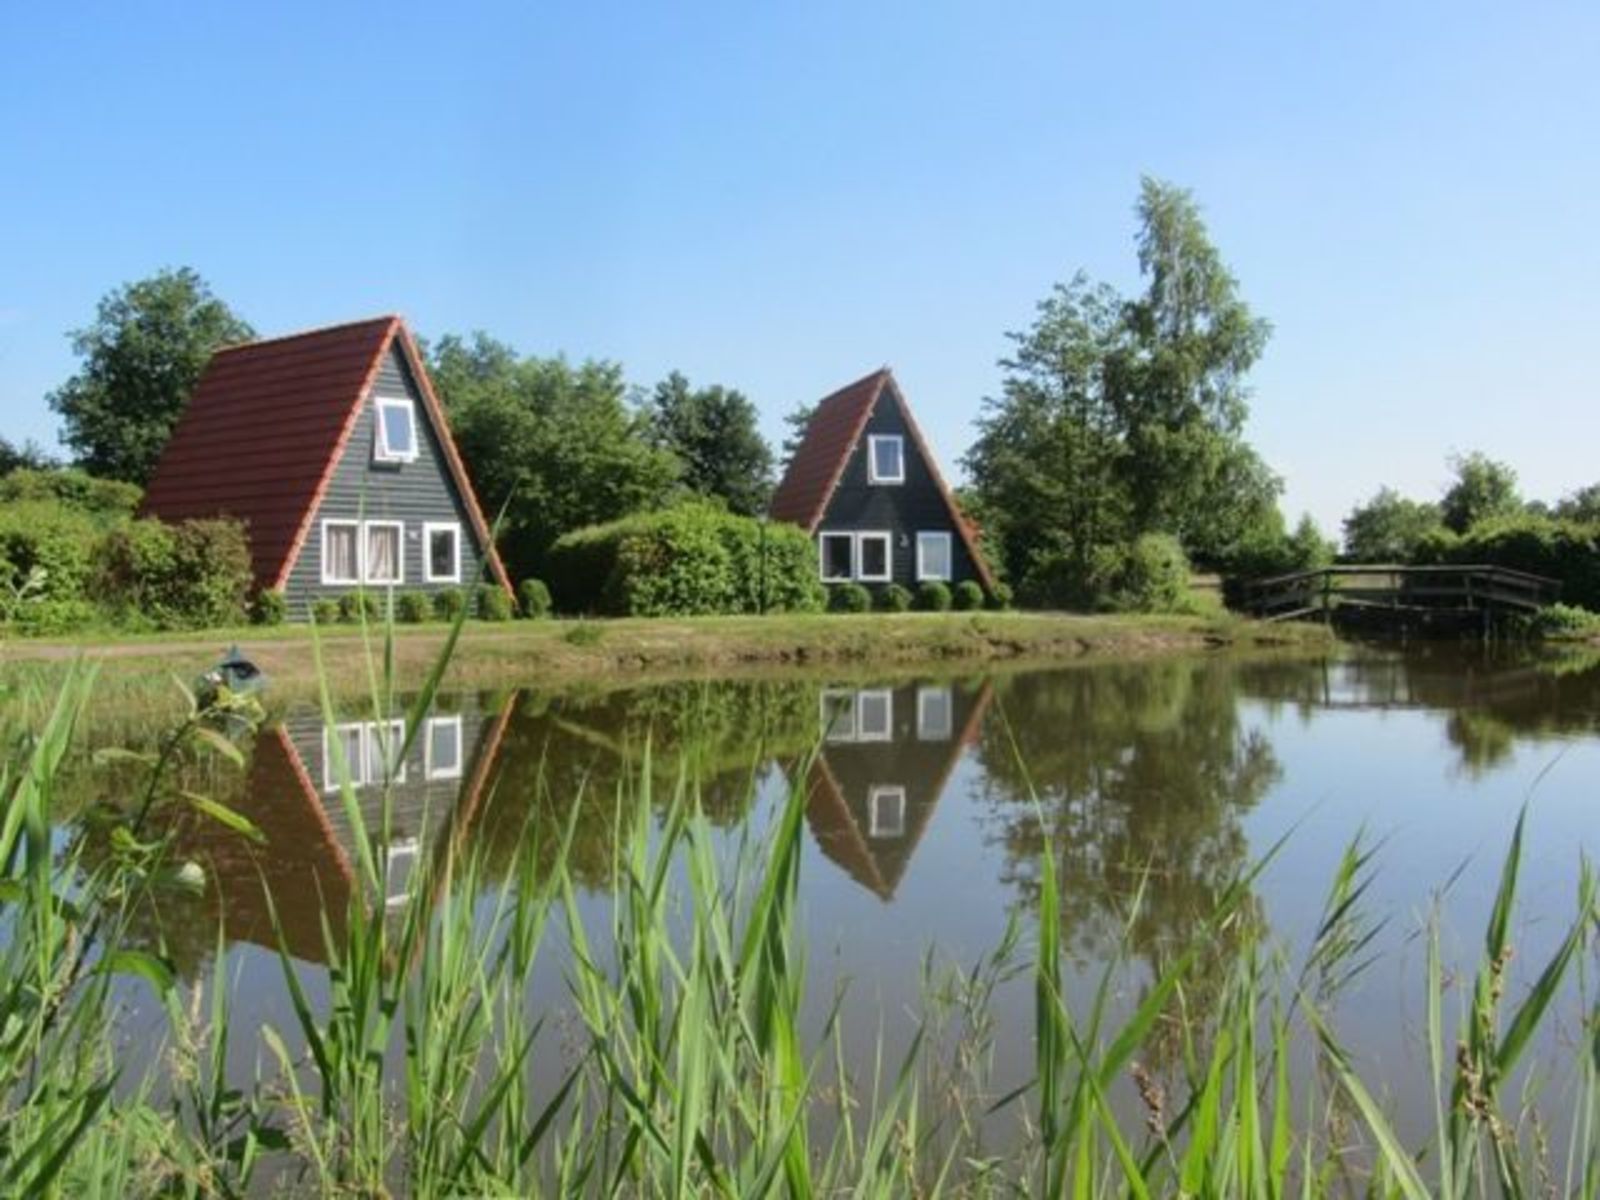 Group accommodation: Large Log Cabin + 3 Fishermen’s houses (18 people)